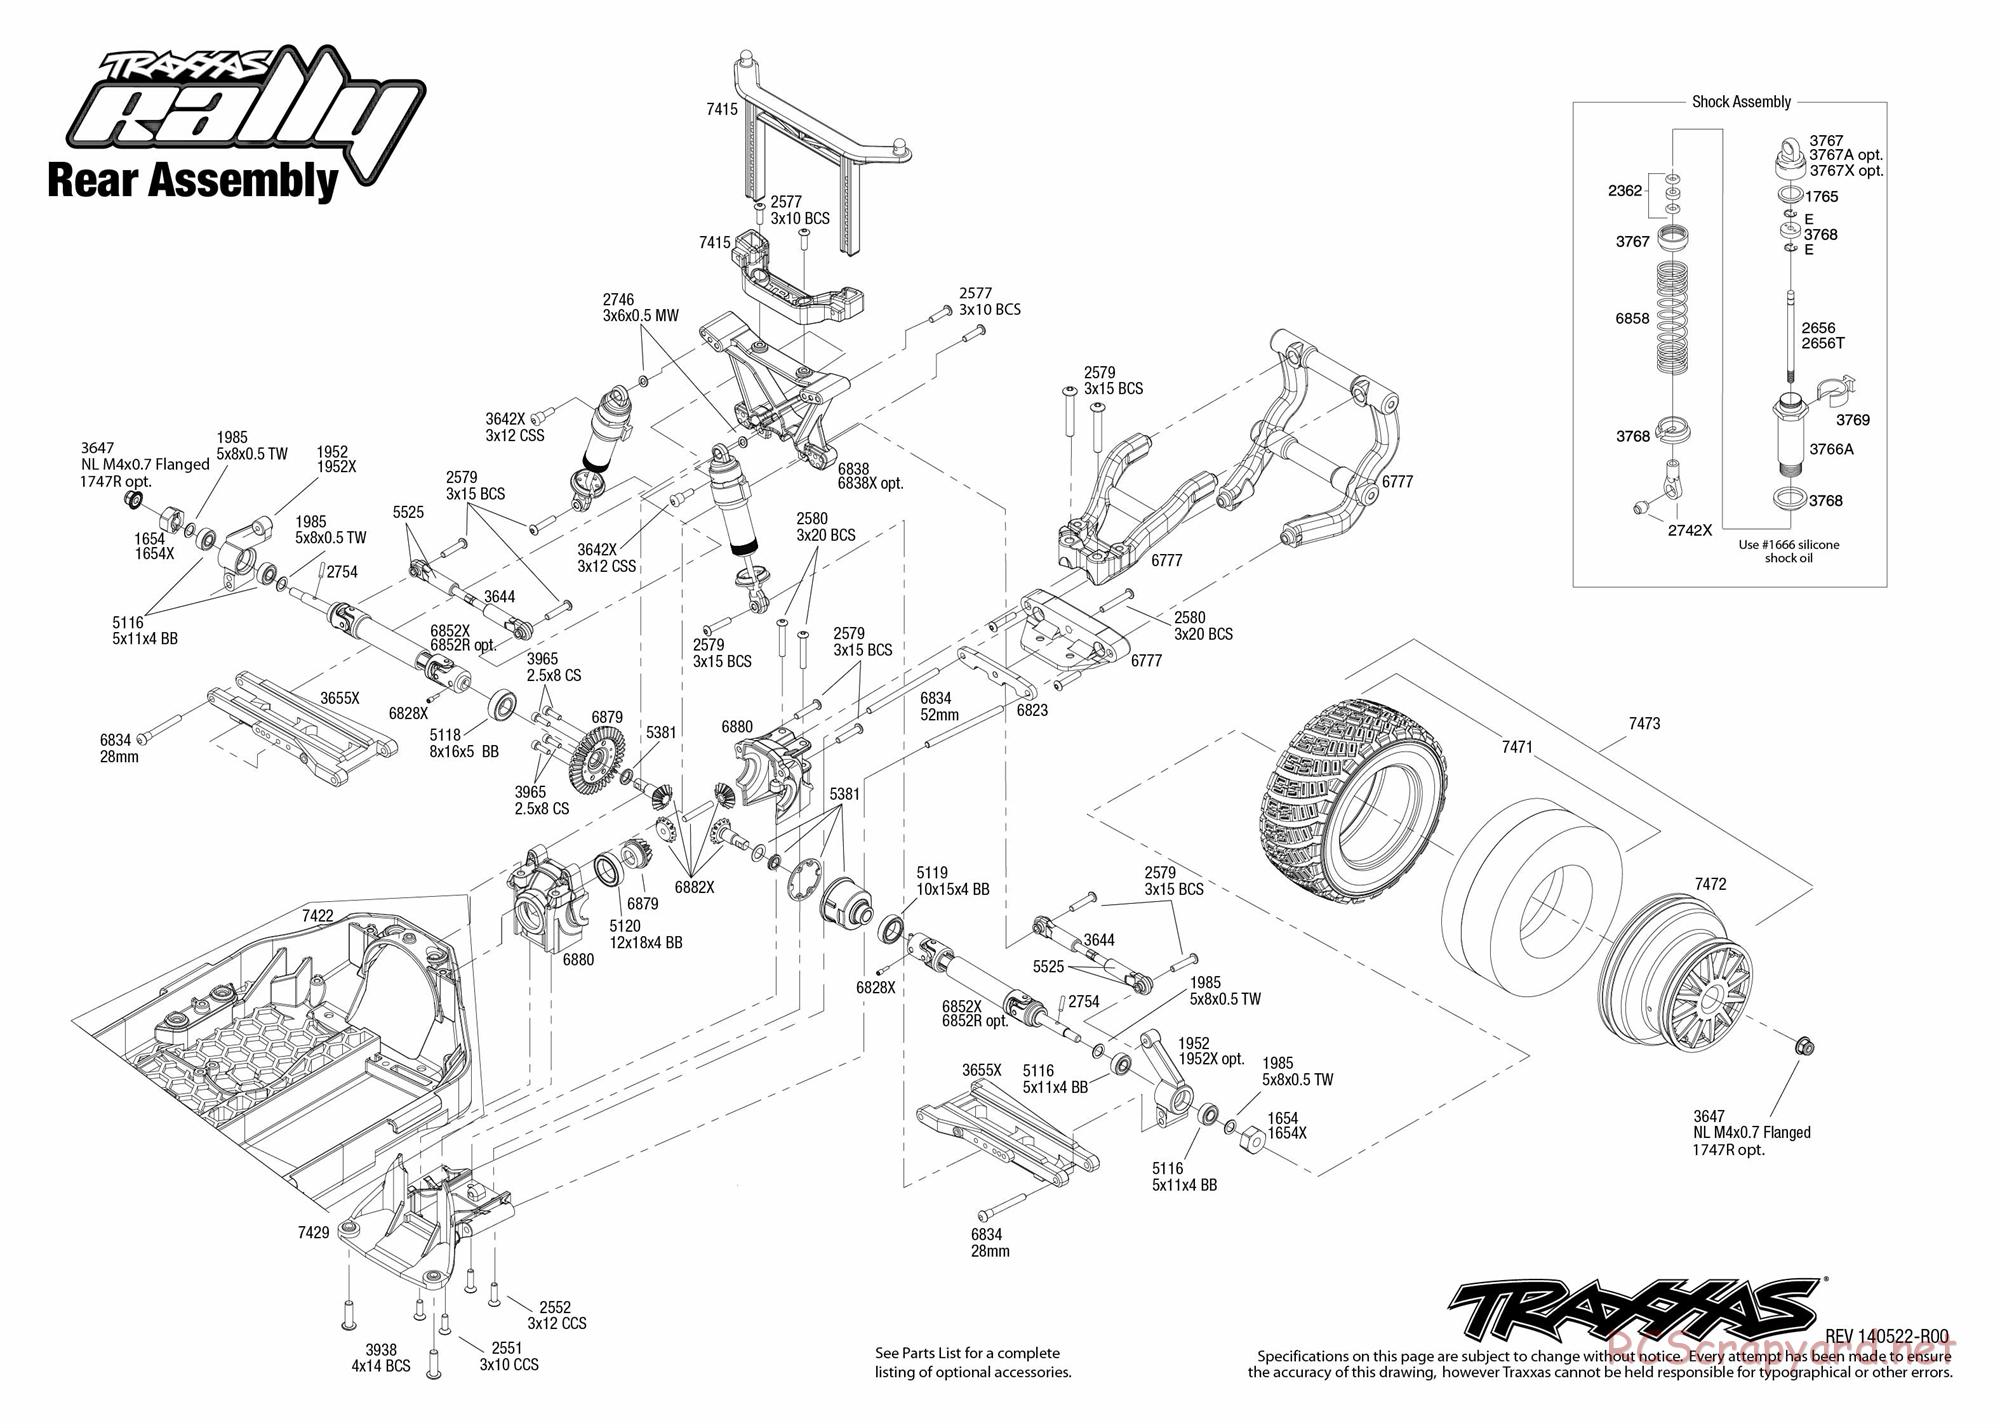 Traxxas - Rally (2014) - Exploded Views - Page 4